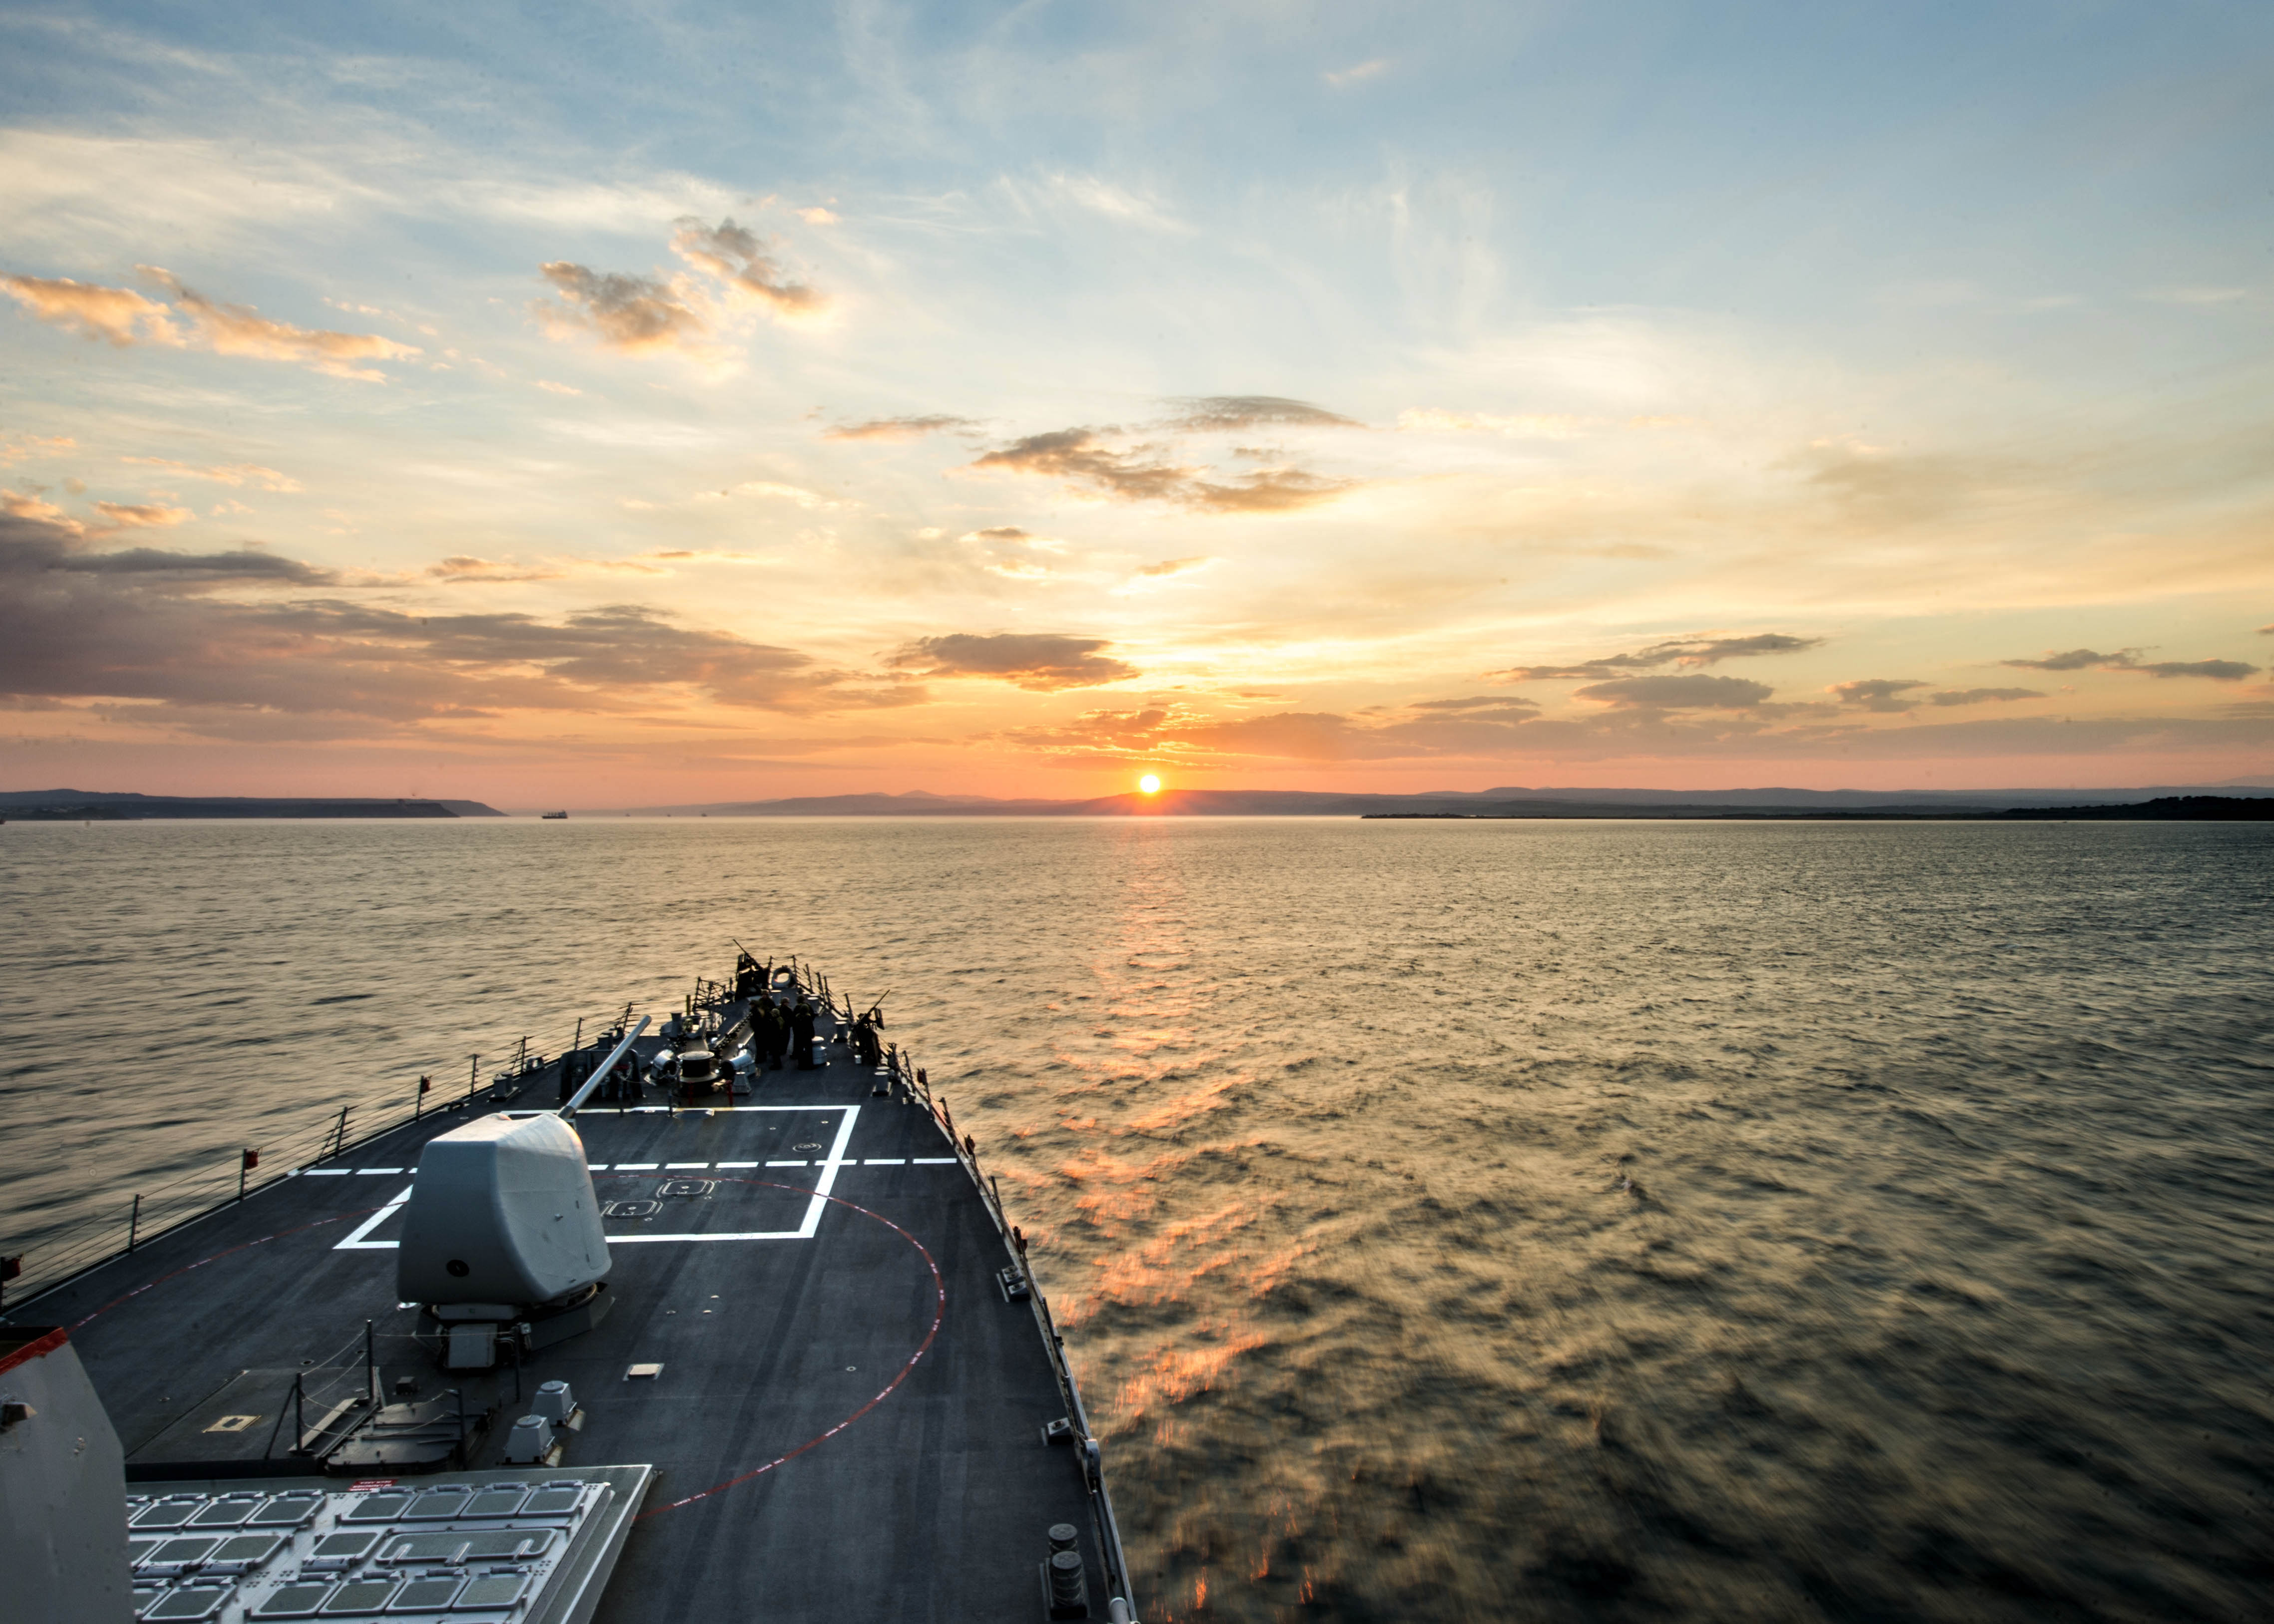 Arleigh Burke-class guided-missile destroyer USS Donald Cook (DDG-75) transits the Dardanelles en route to the Black Sea. US Navy Photo